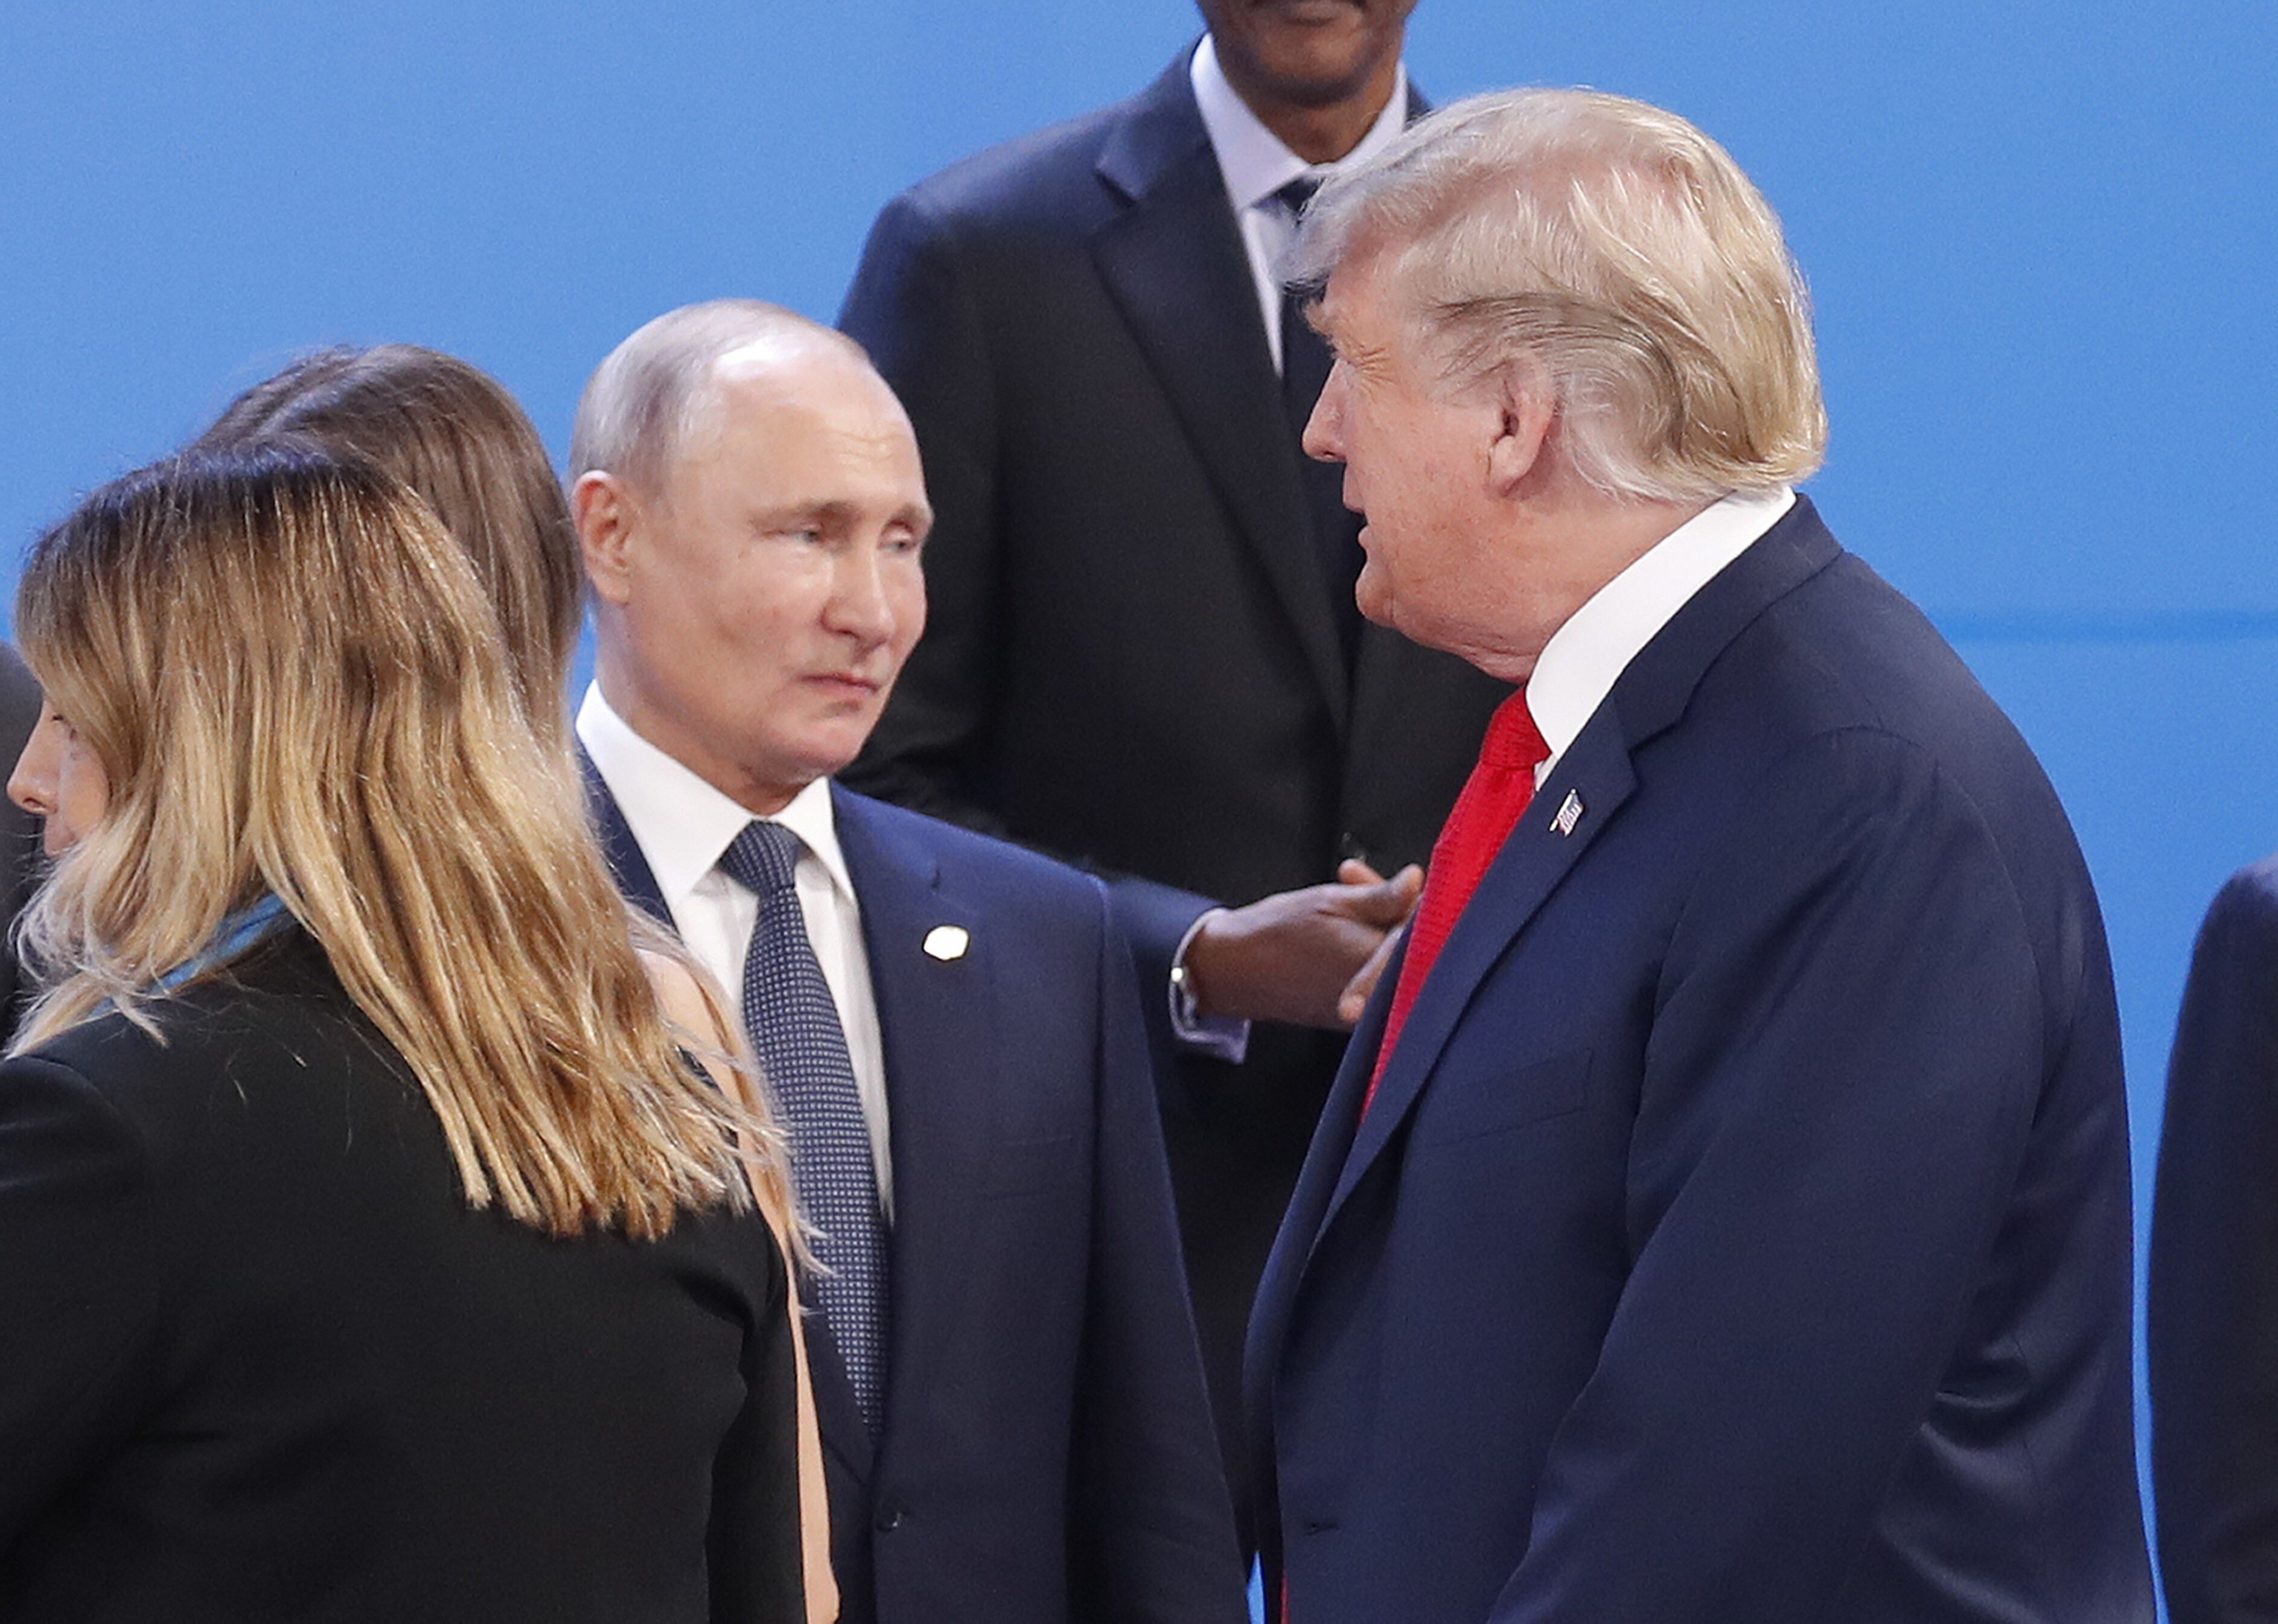 US President Donald Trump (right) walks past Russia’s President Vladimir Putin as they prepare for a group photo at the start of the G20 summit in Buenos Aires in November 2018. Photo: AP